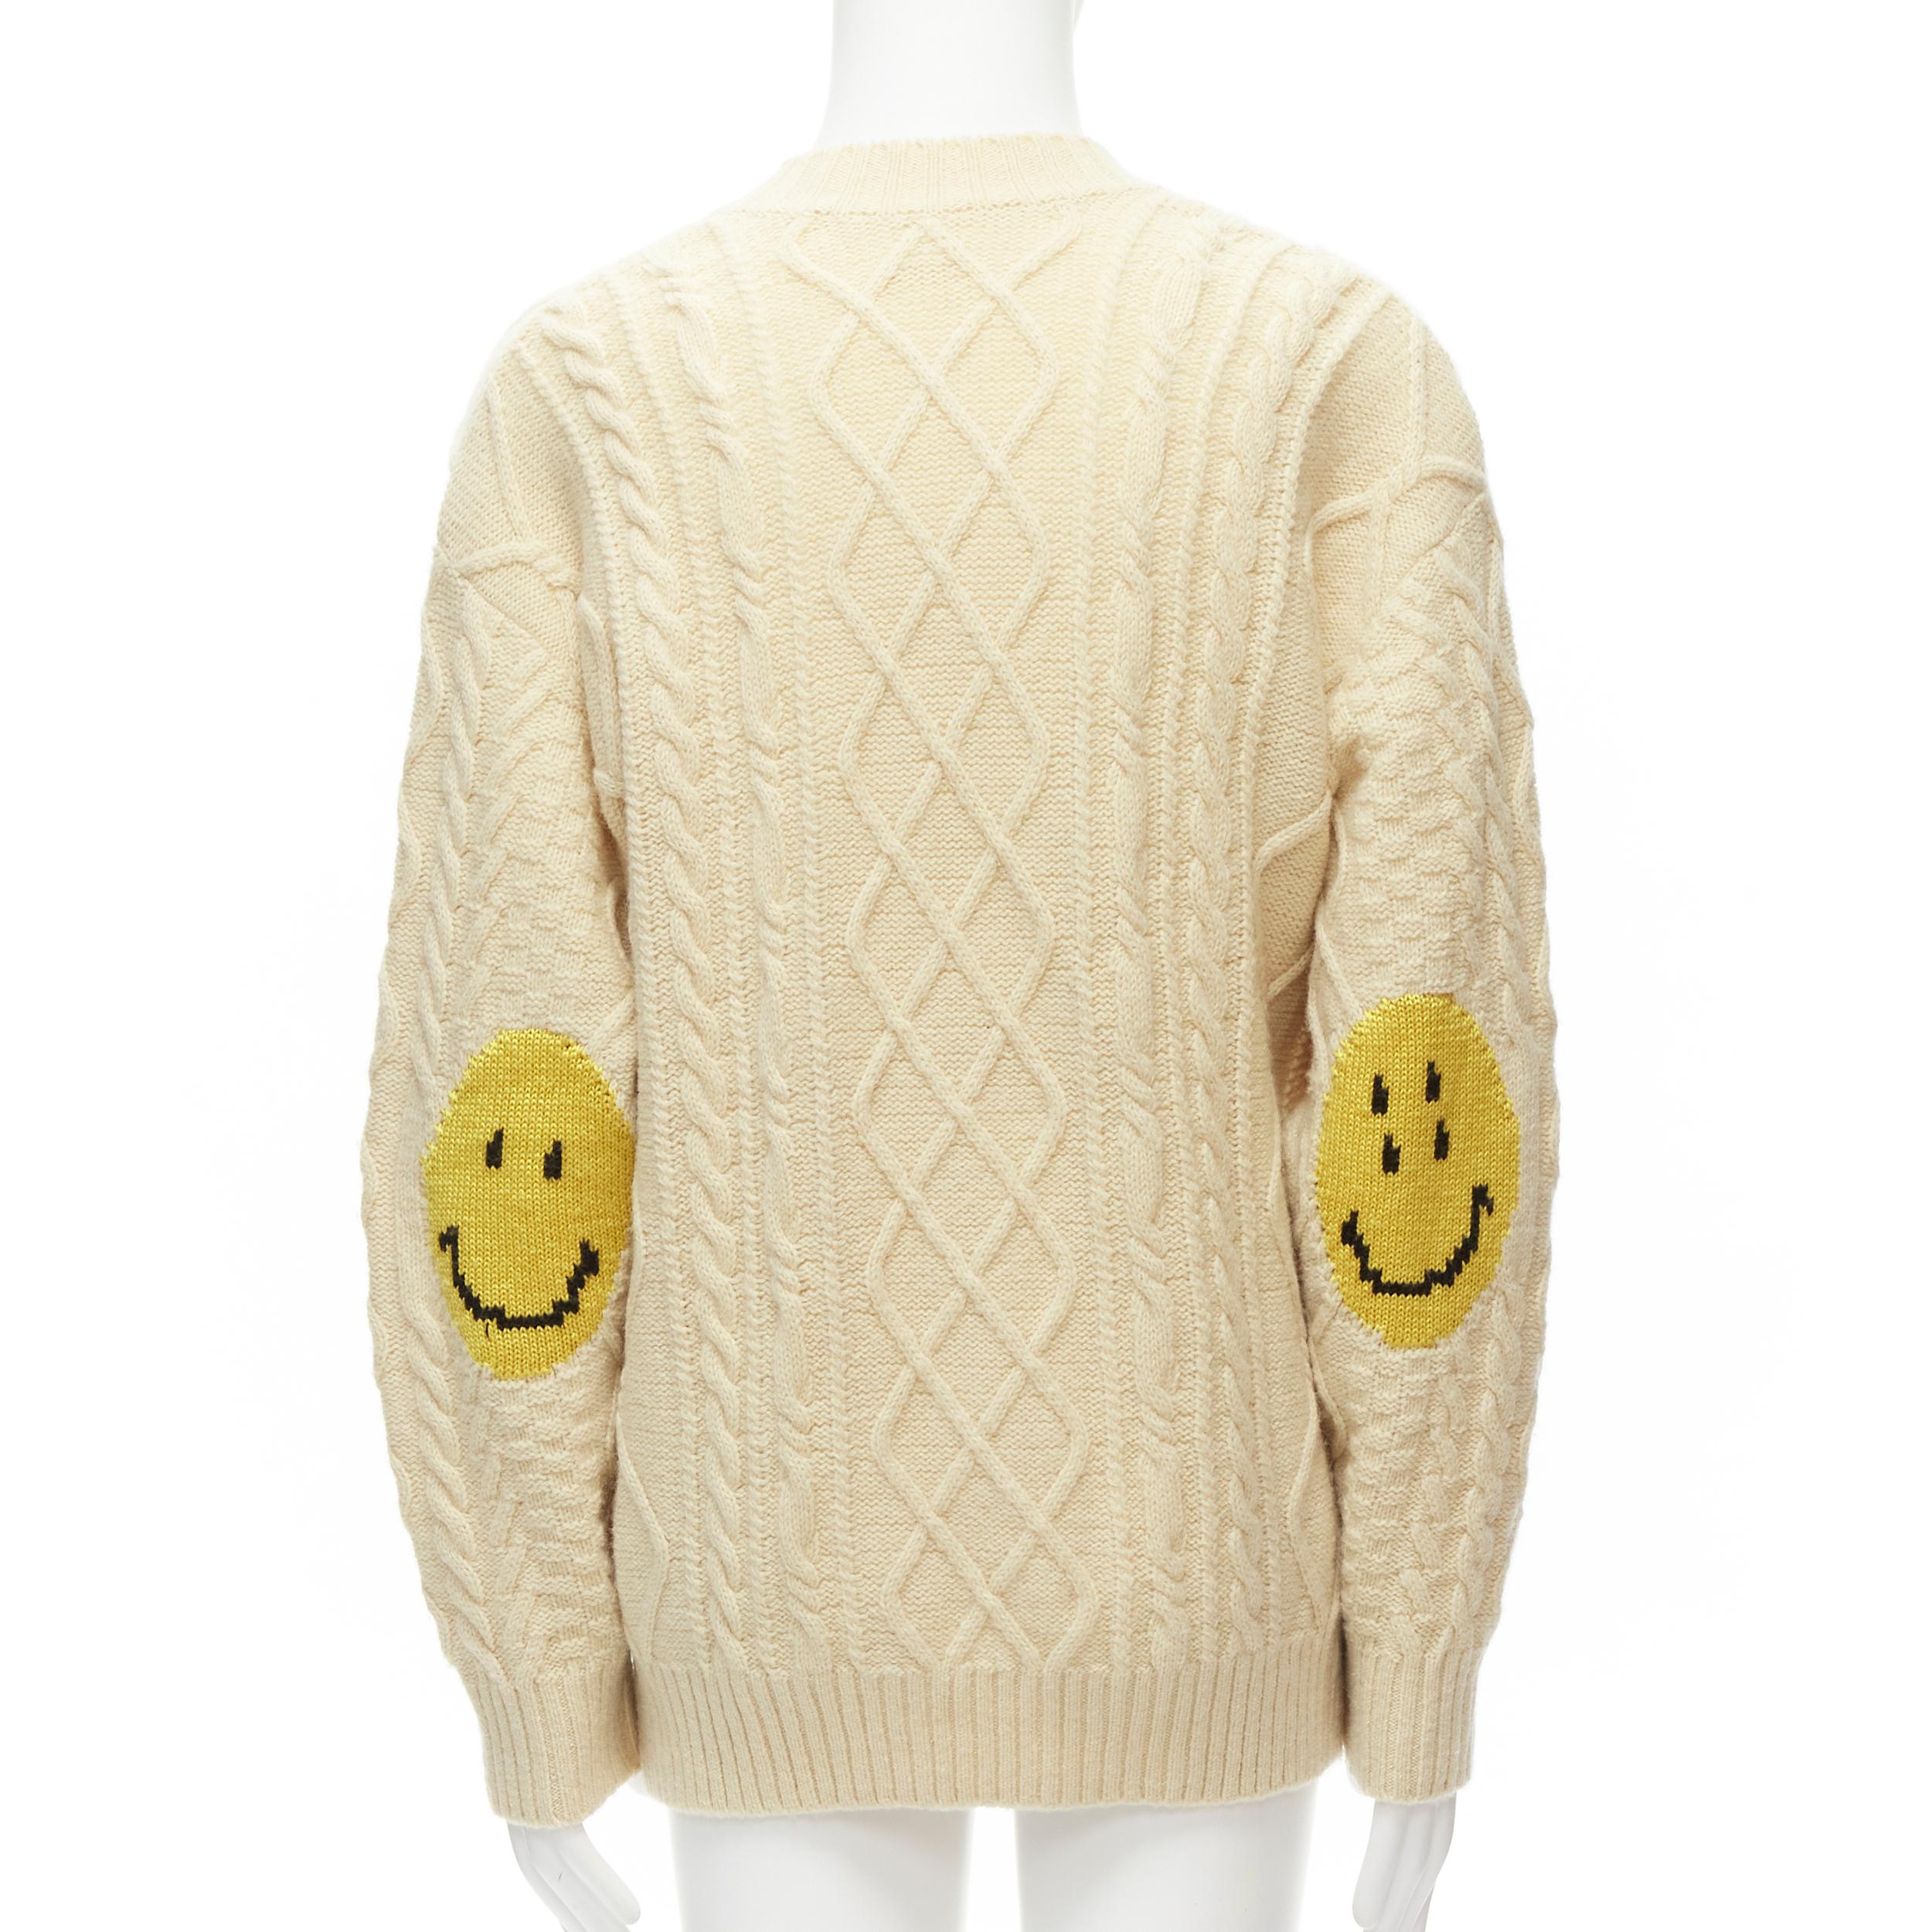 KAPITAL 5G cream wool Happy Smiley elbow patch cable knit cardigan JP1 S
Reference: TGAS/C01940
Brand: Kapital
Collection: 5G
Material: Wool, Acrylic
Color: Cream
Pattern: Solid
Closure: Button
Extra Details: HAPPY smiley elbow patches at the back